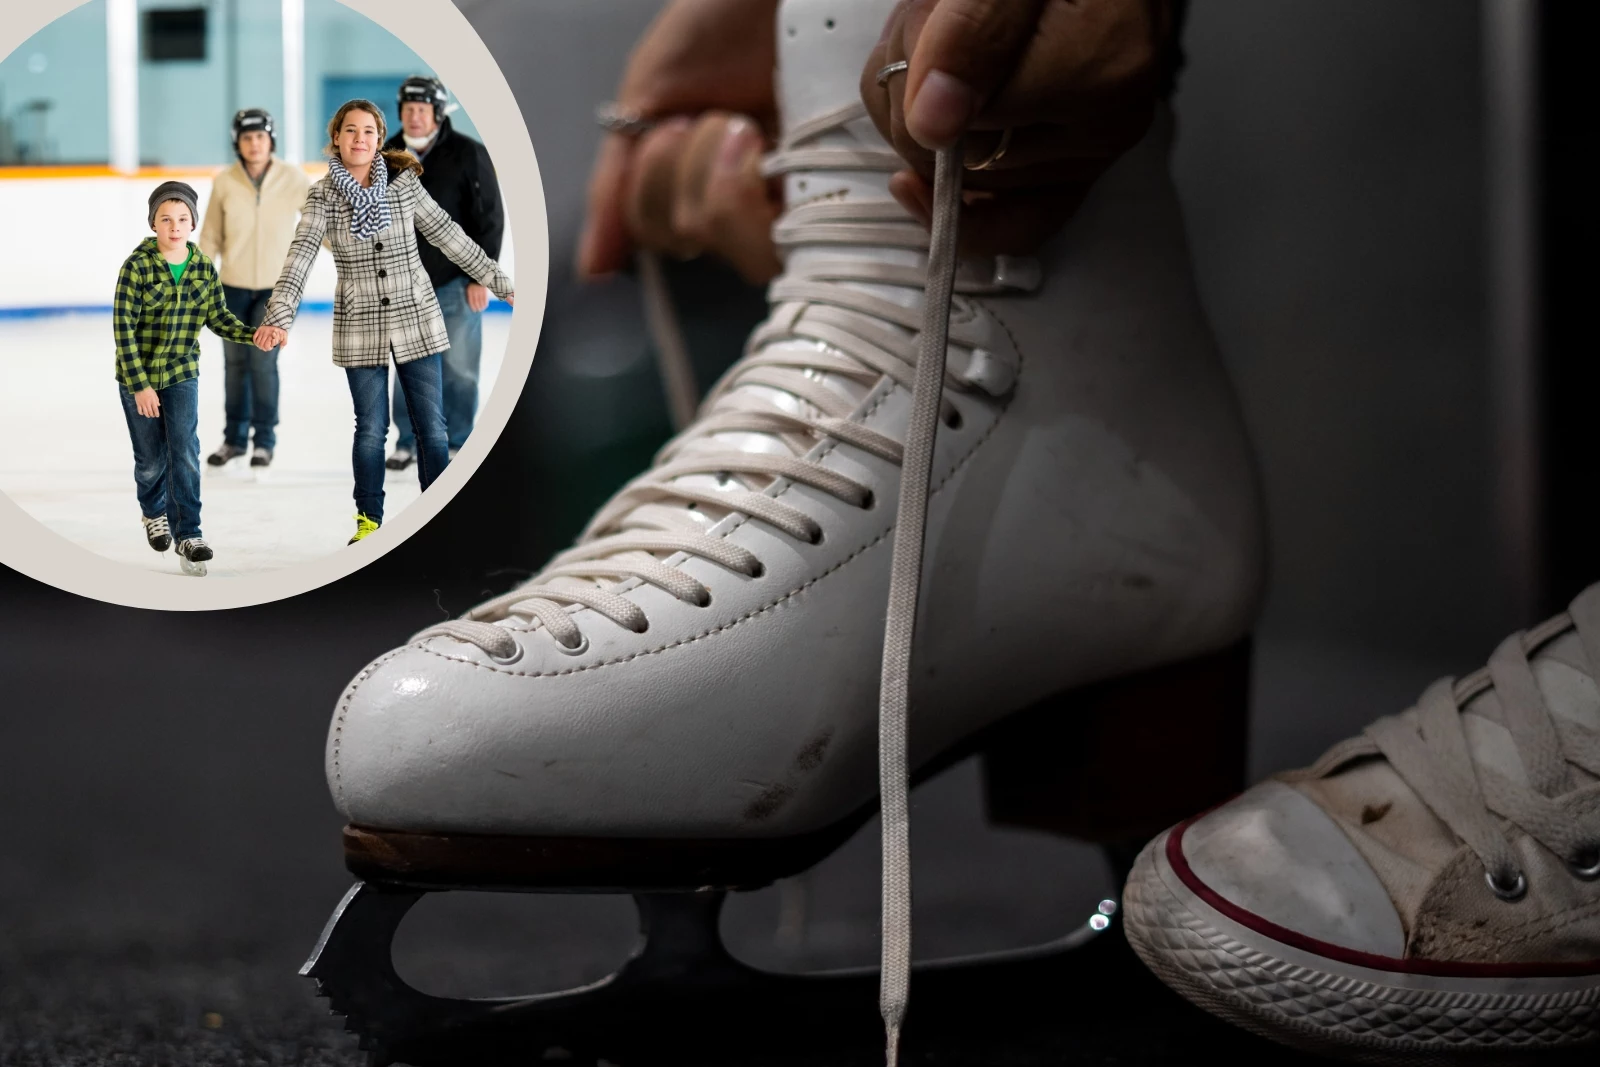 Here Are 10 COOL Indoor Ice Skating Rinks Located in WA